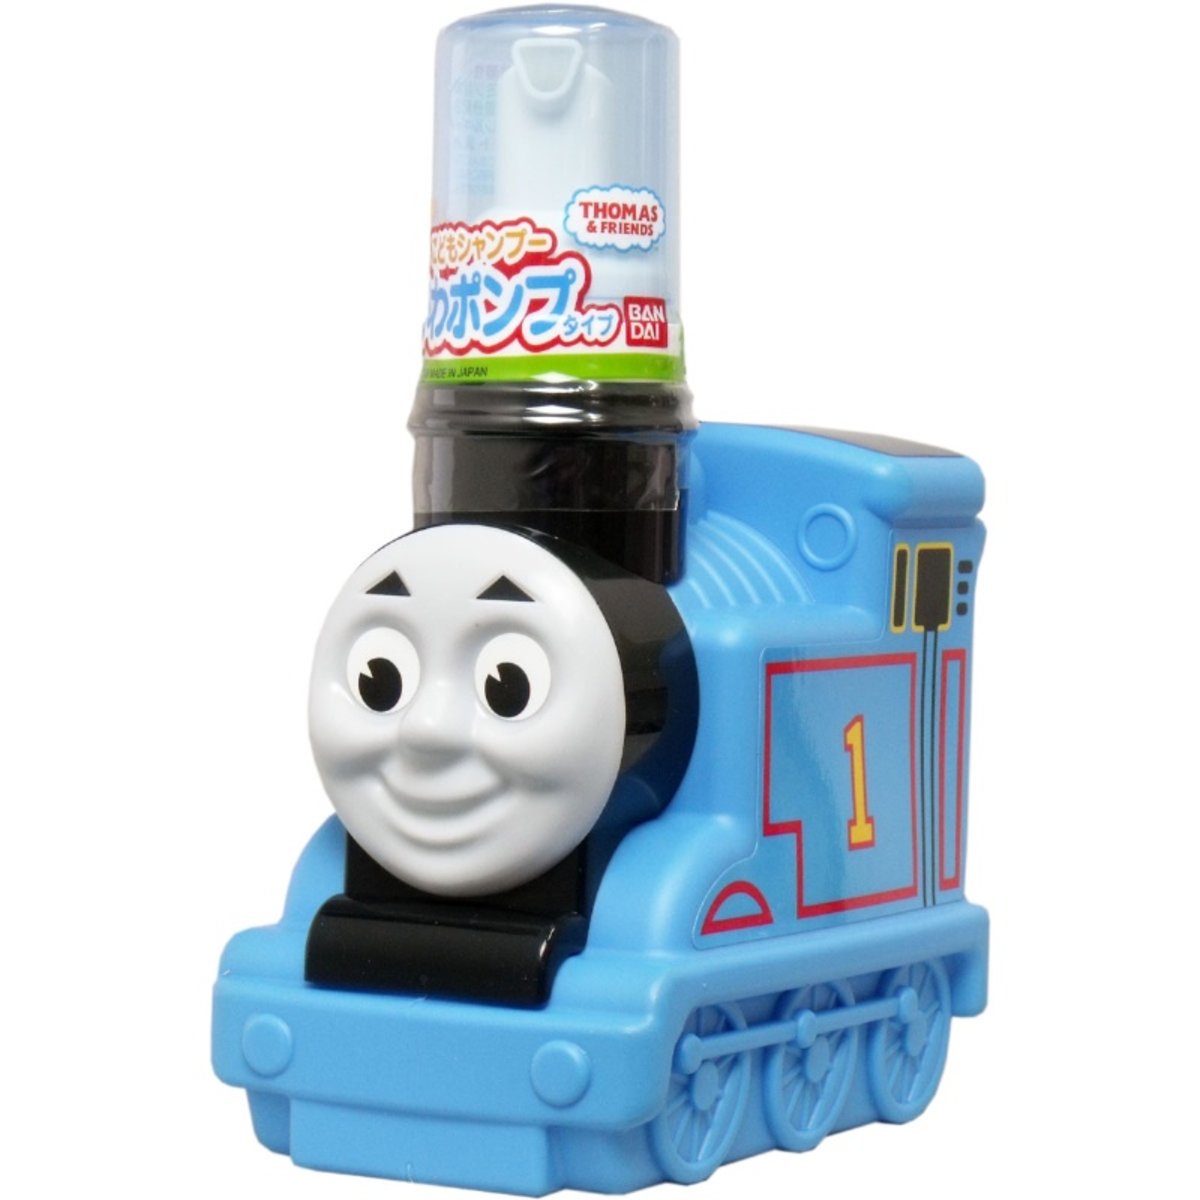 THOMAS SHAMPOO FOR KIDS 250ML (Parallel Import Product)